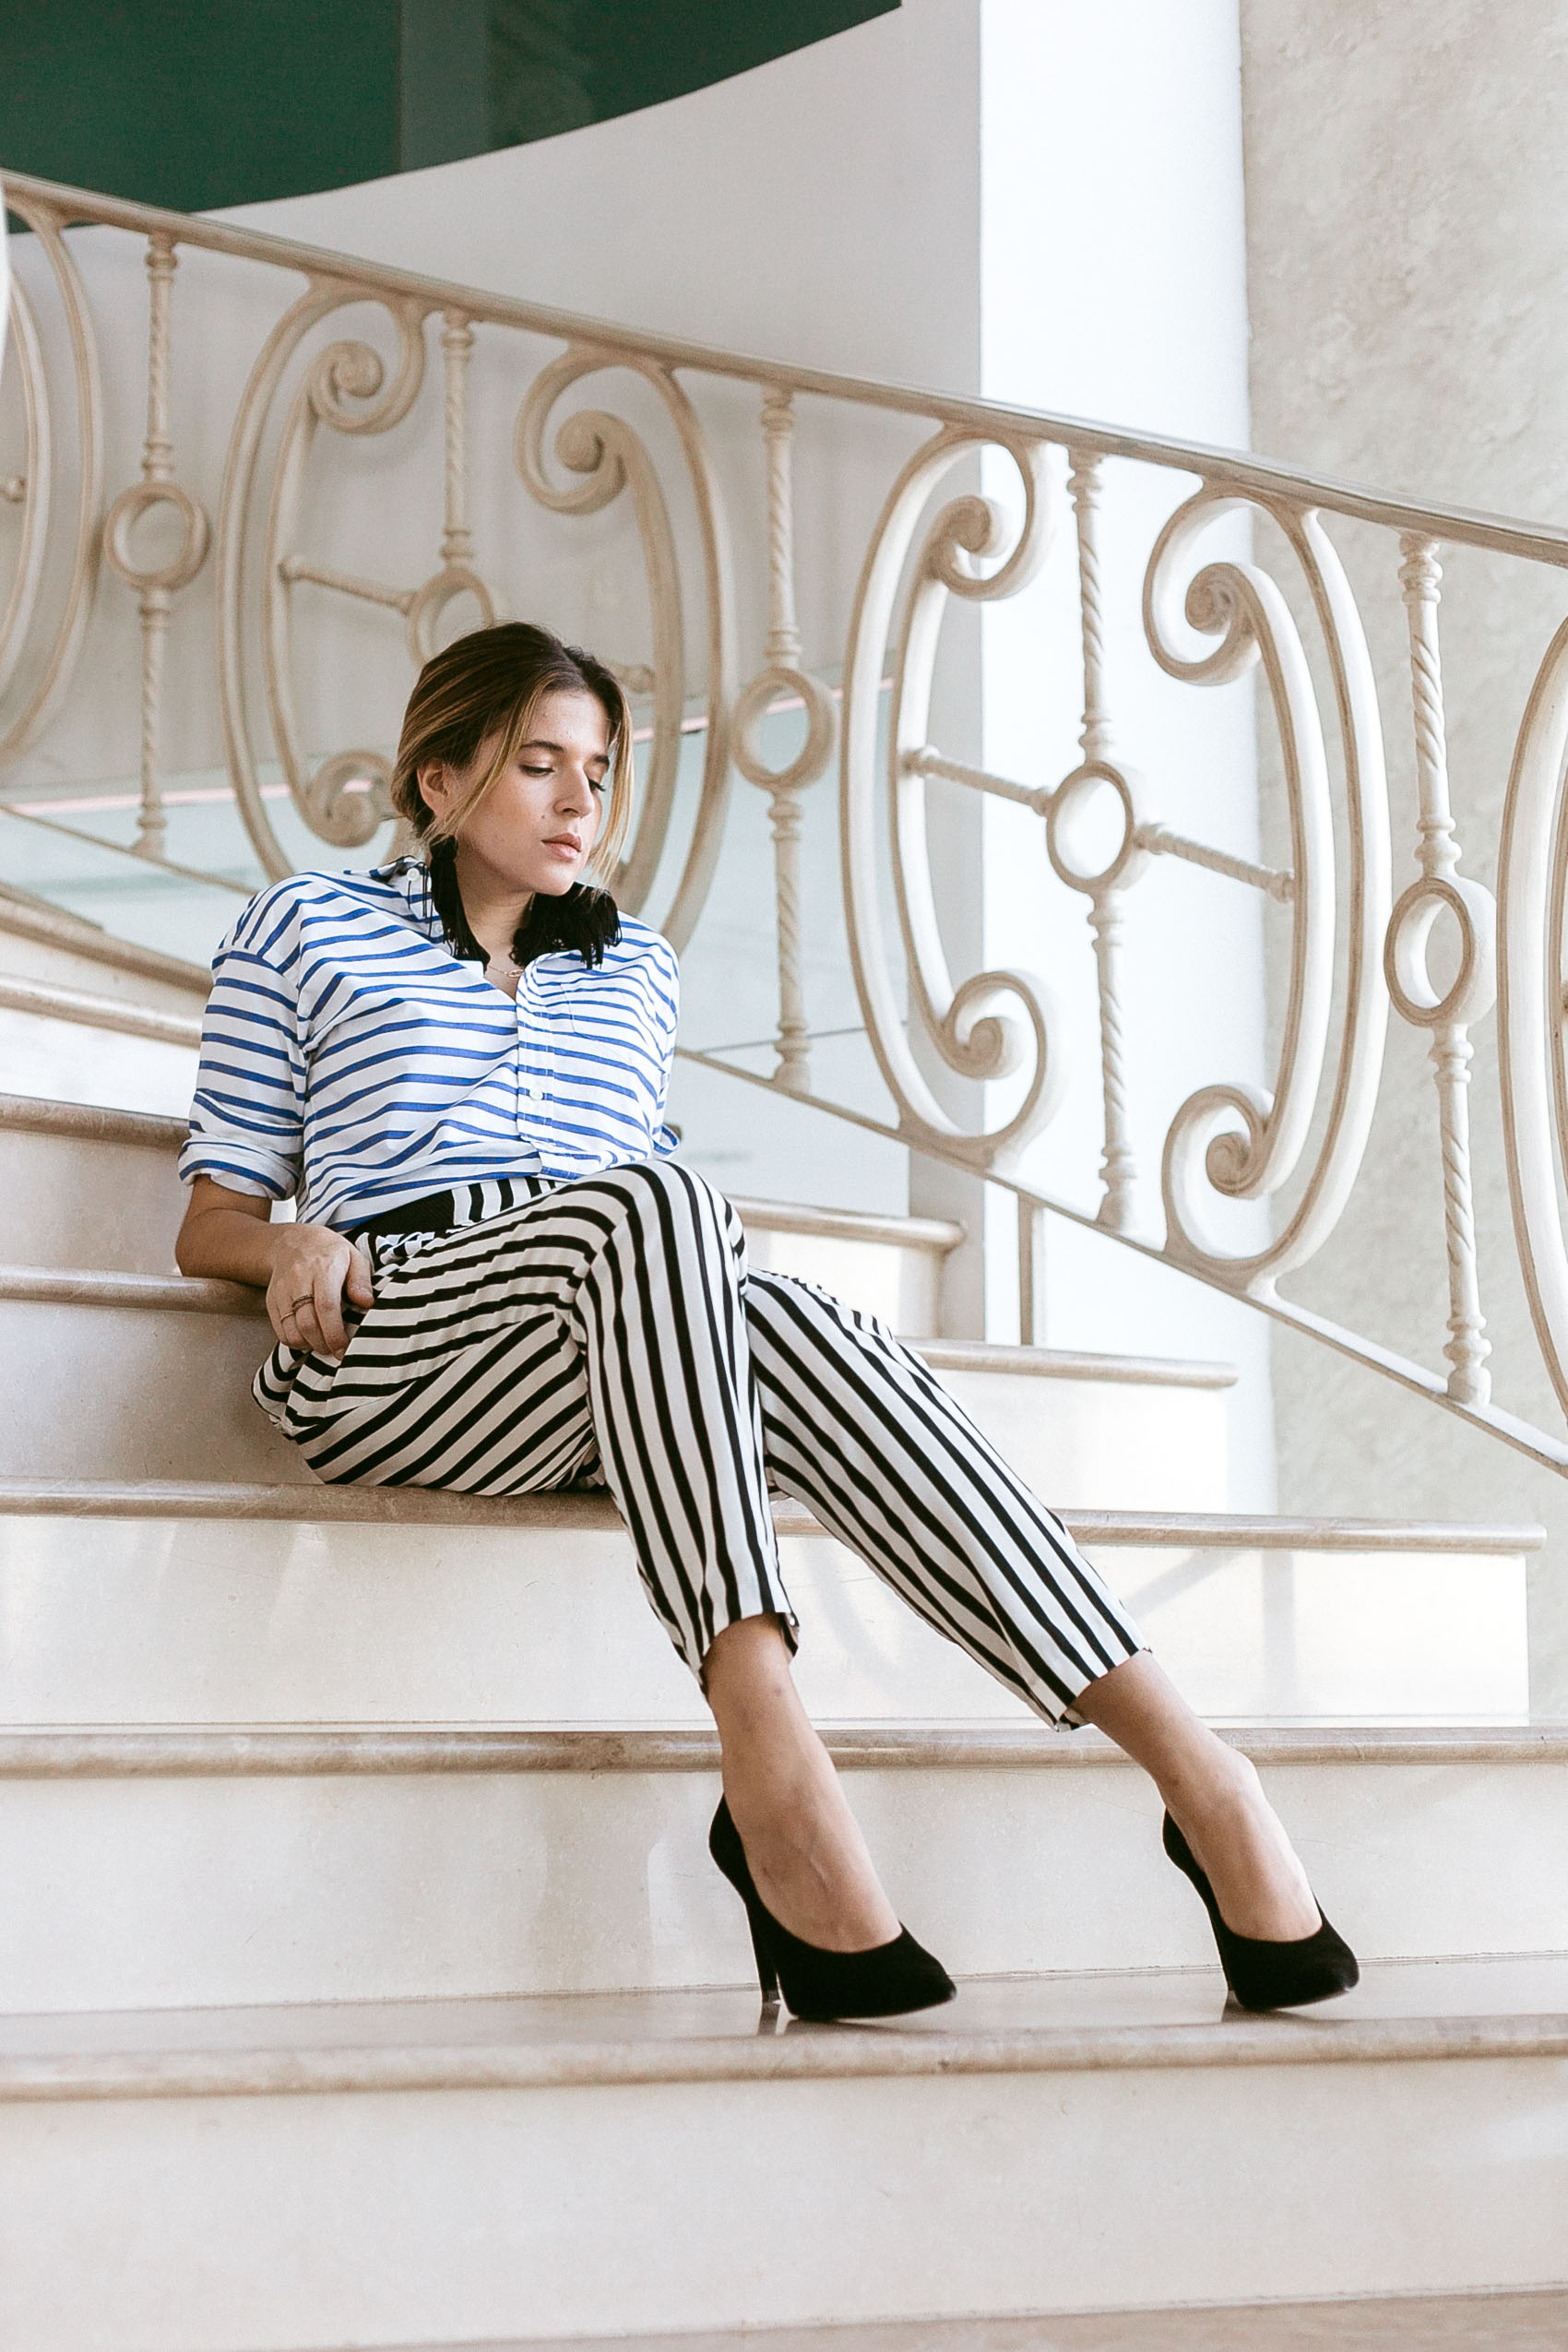 Maristella wears a stripe on stripe look of the day with tassel earrings and black pumps